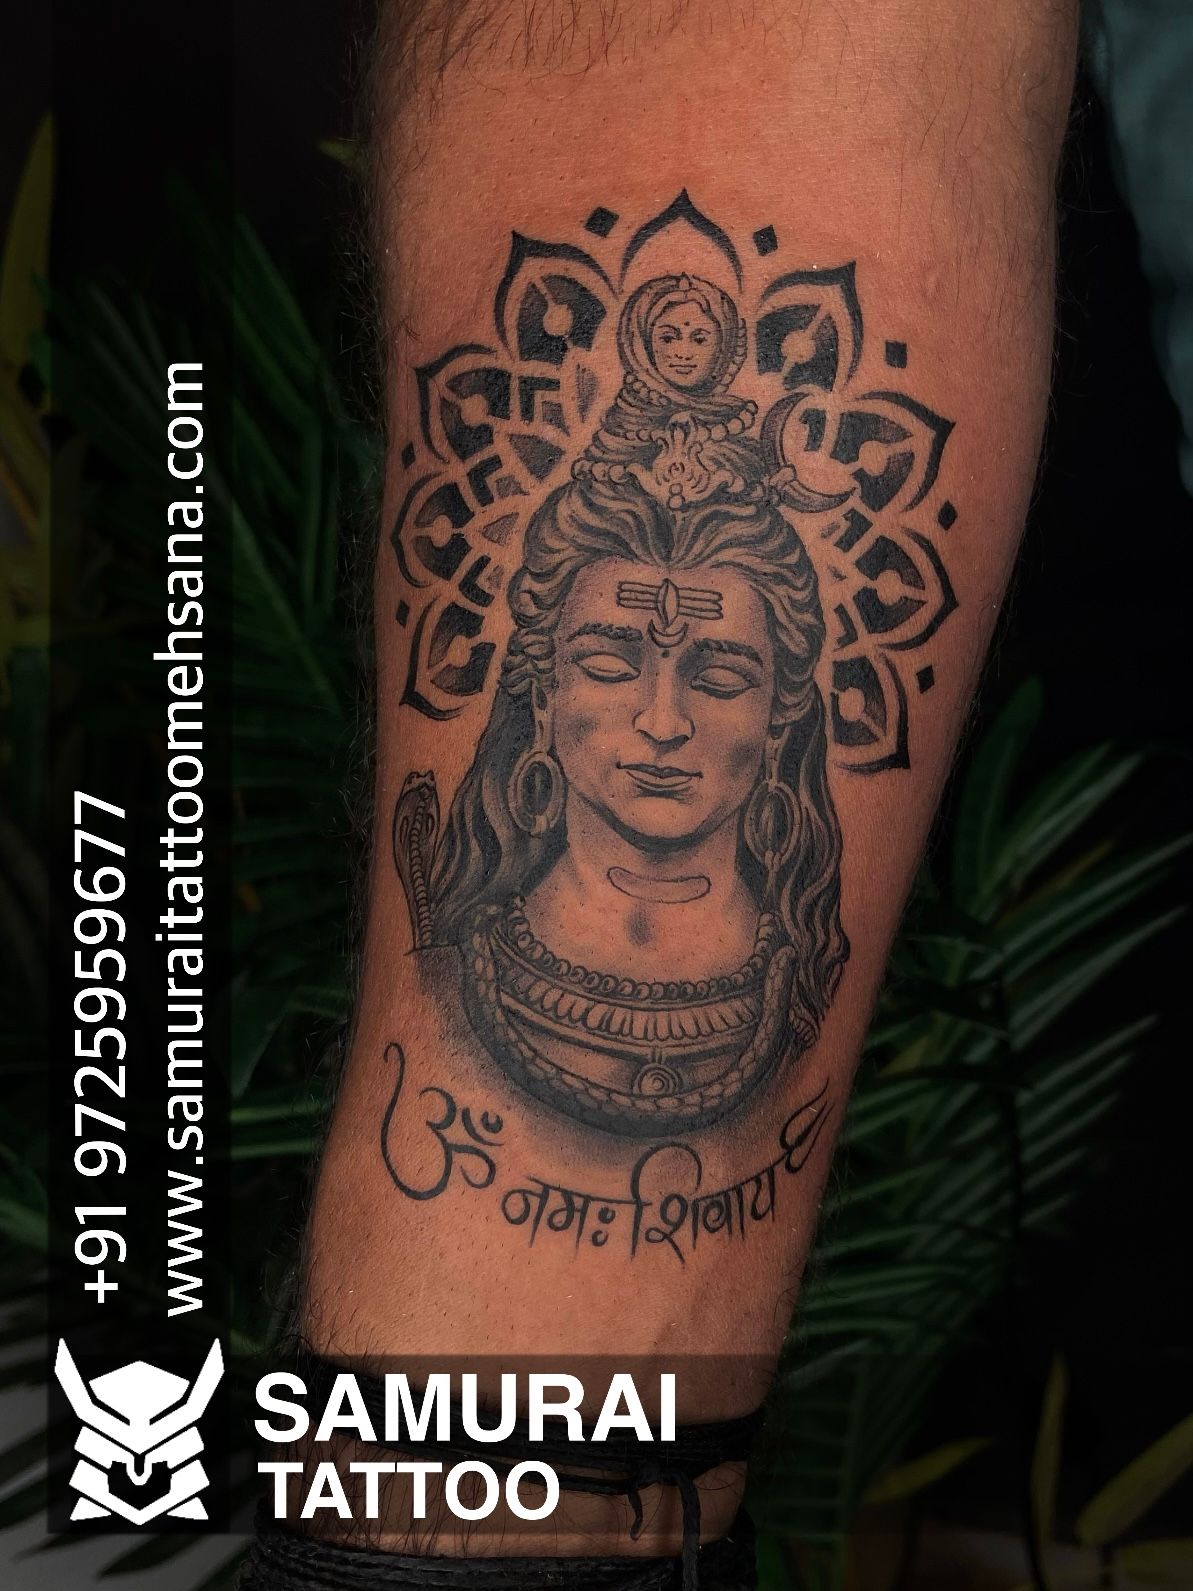 Take a closer look, strong, powerful and beautiful, isn't it? Started this  Lord Shiva Tattoo Sleeve yesterday, I am lo… | Shiva tattoo, Alien tattoo,  Sleeve tattoos